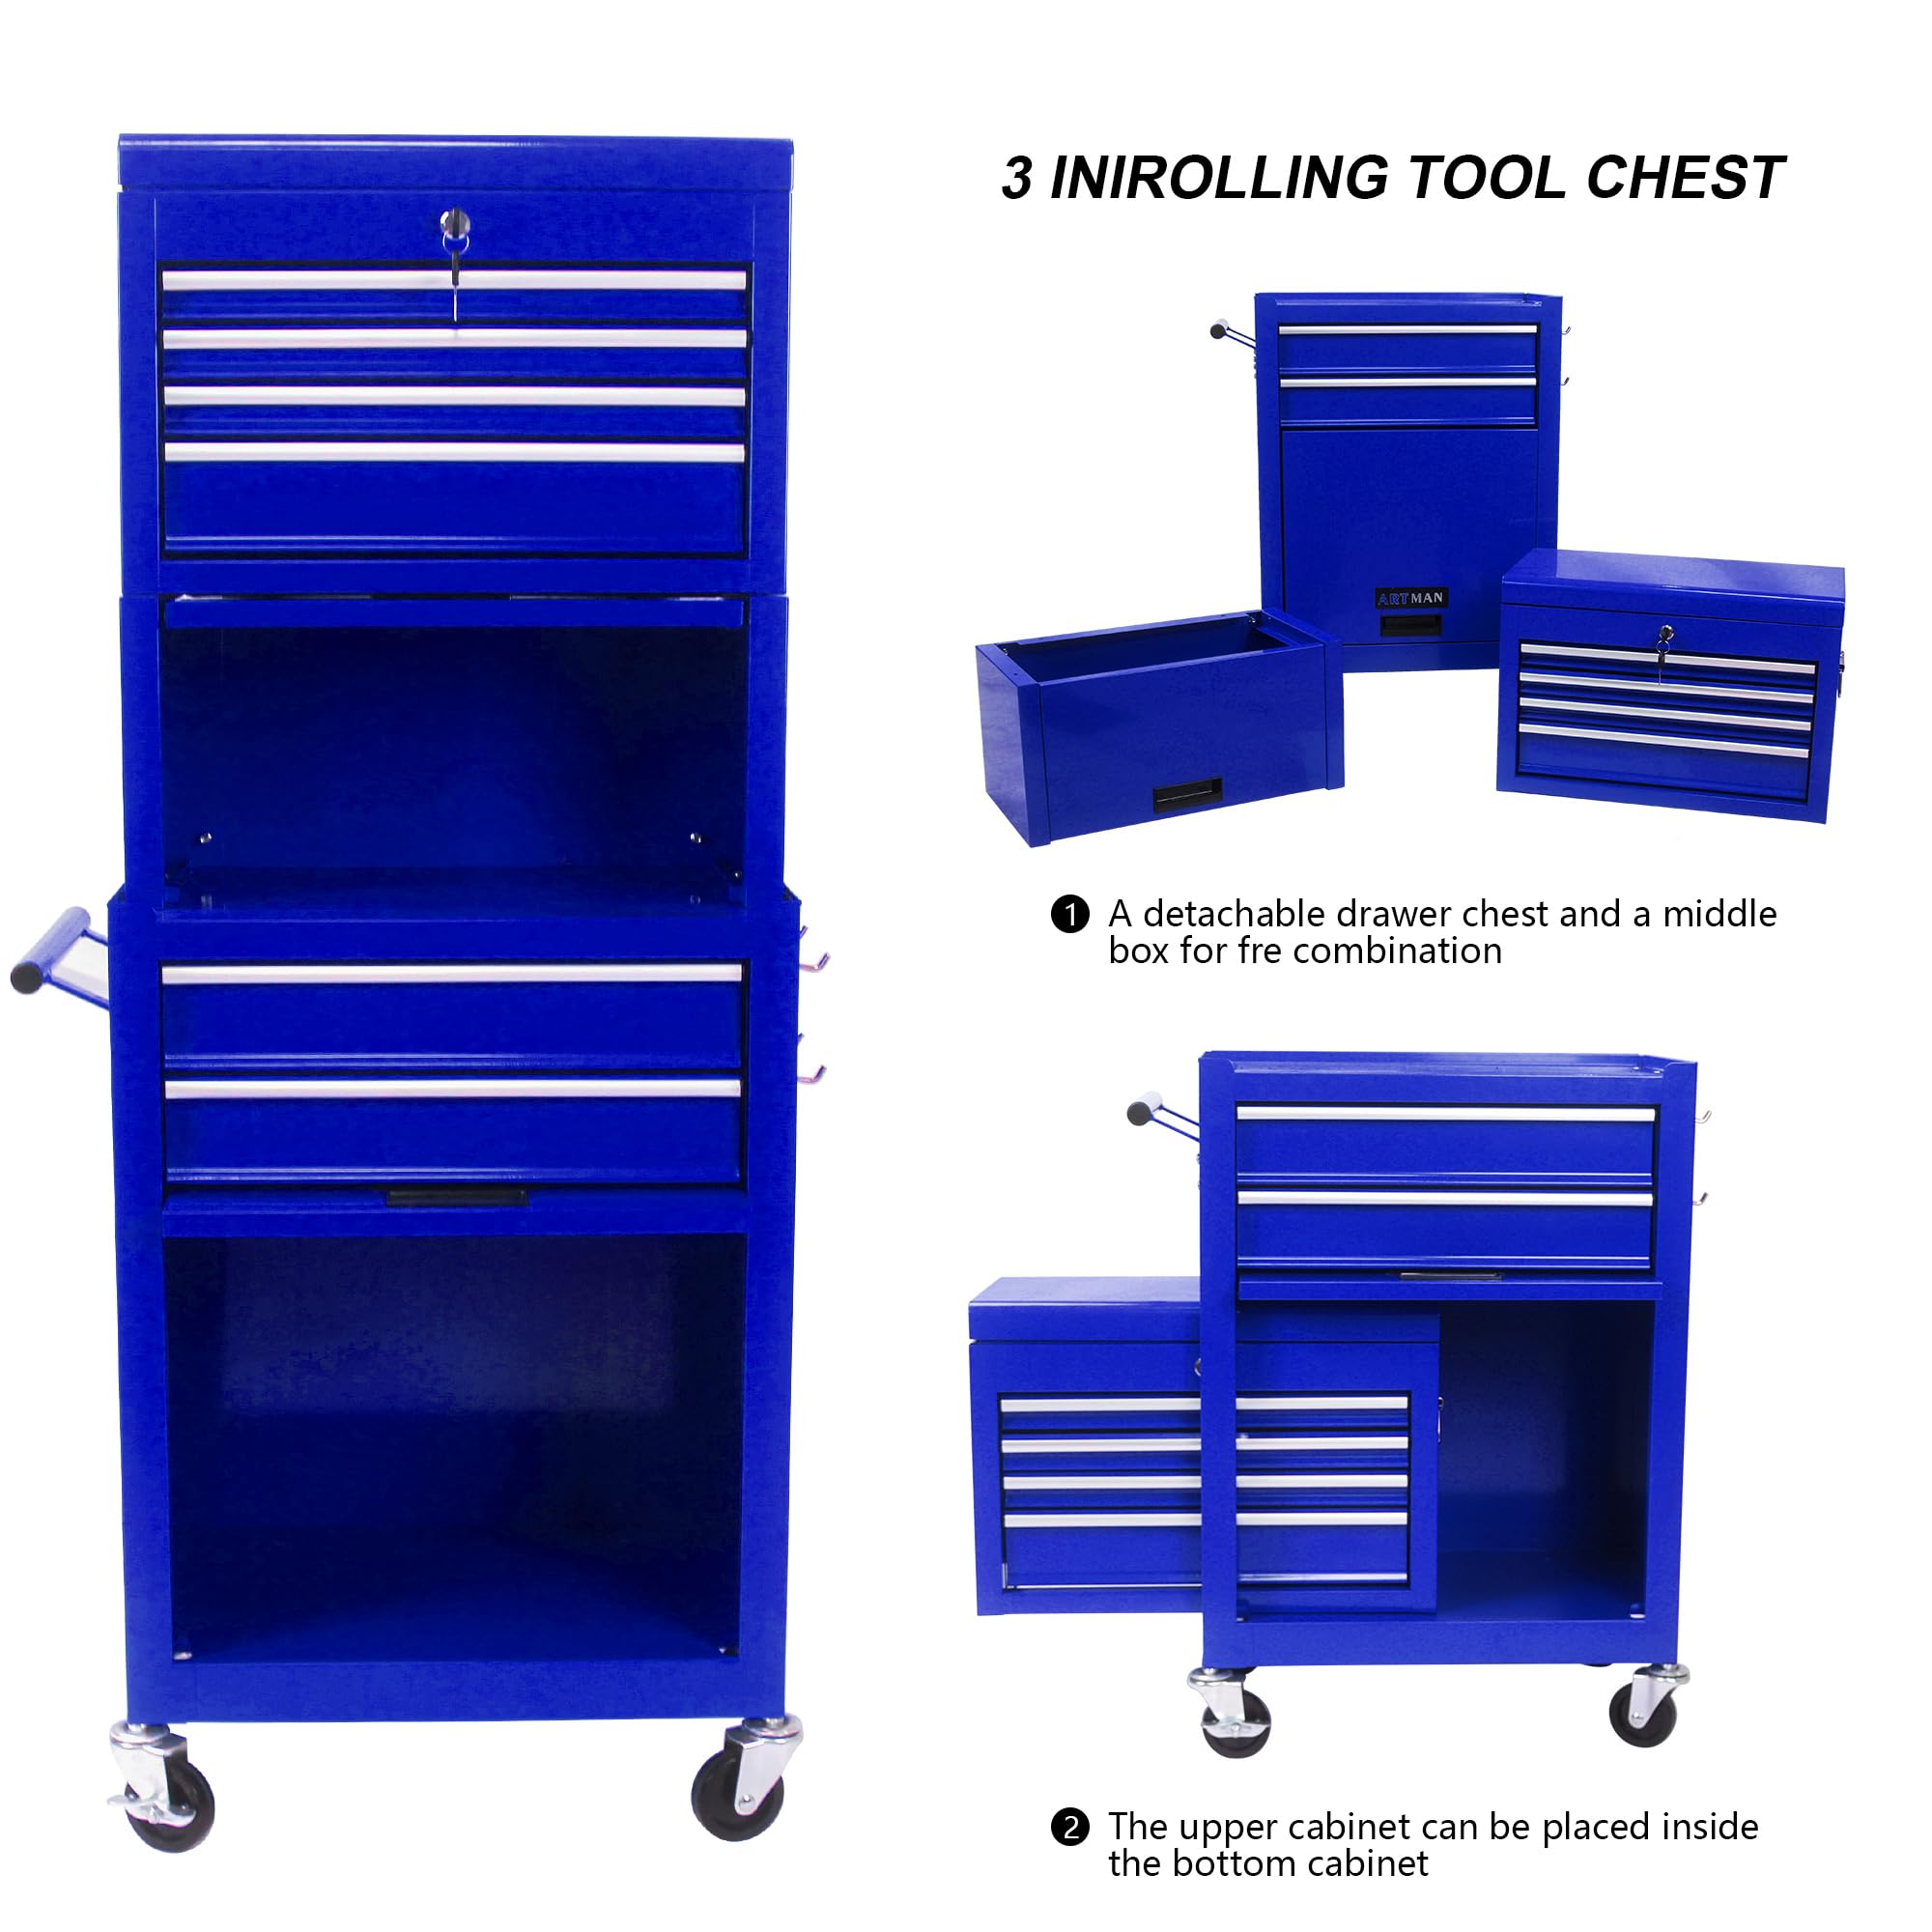 Fulvari Rolling Tool Chest, 6 Drawers Rolling Tool Chest with Wheels, Portable Rolling Tool Box on Wheels, High Capacity Tool Chest Organizer for Garage, Workshop, Home Crafts Use (Blue)